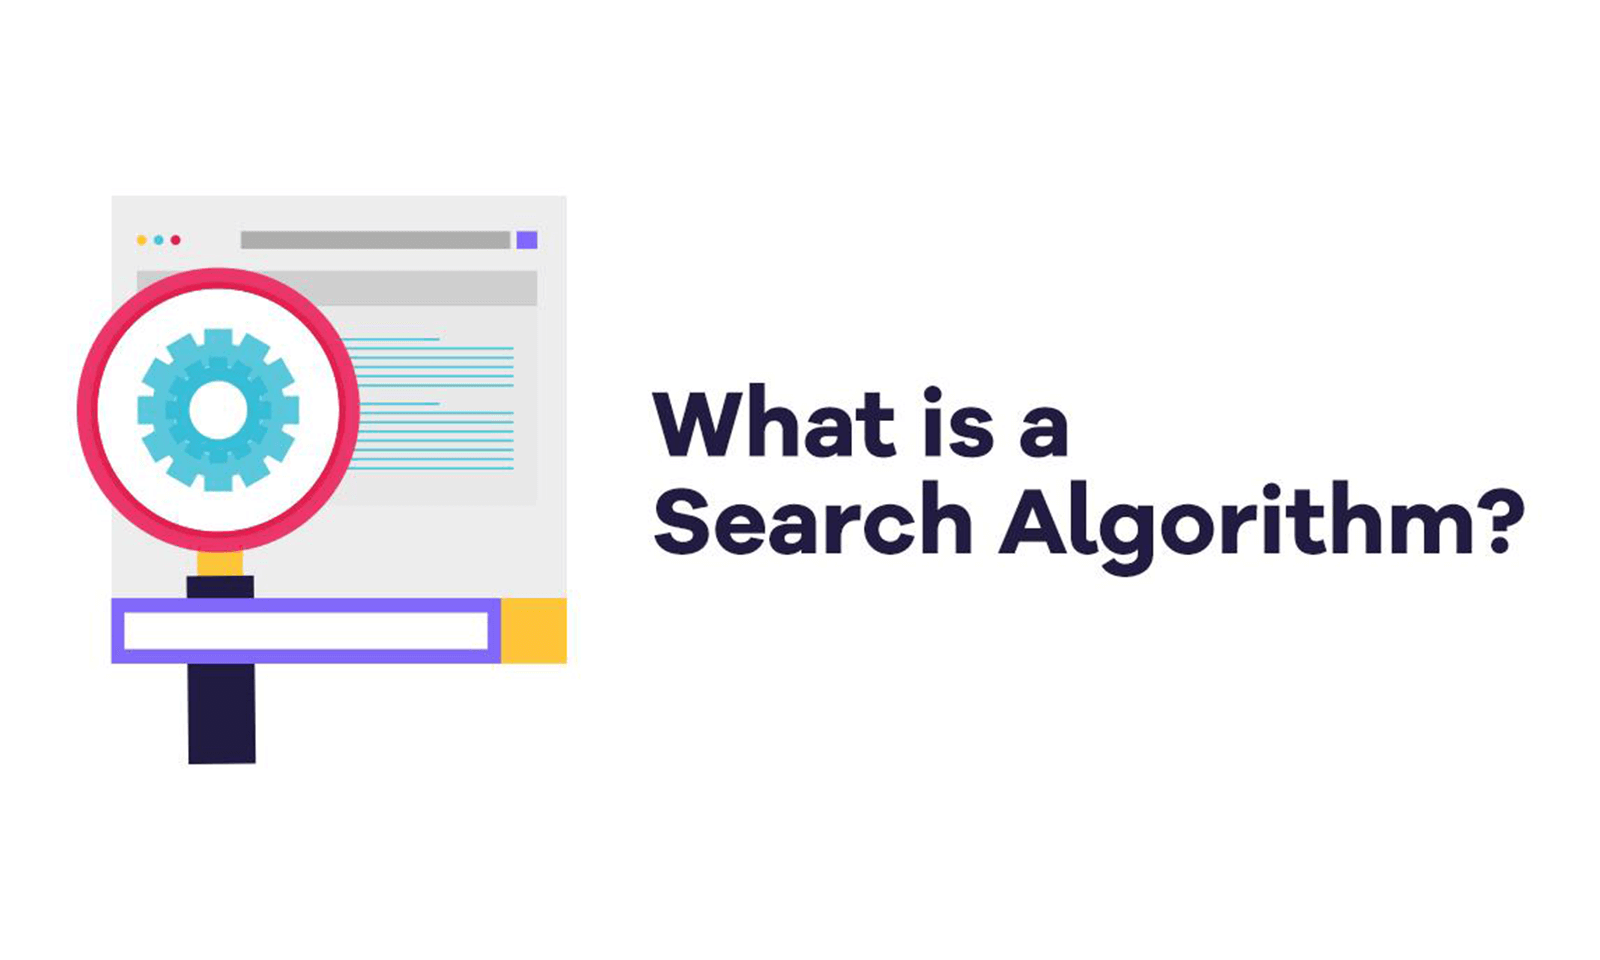 What is a Search Algorithm?